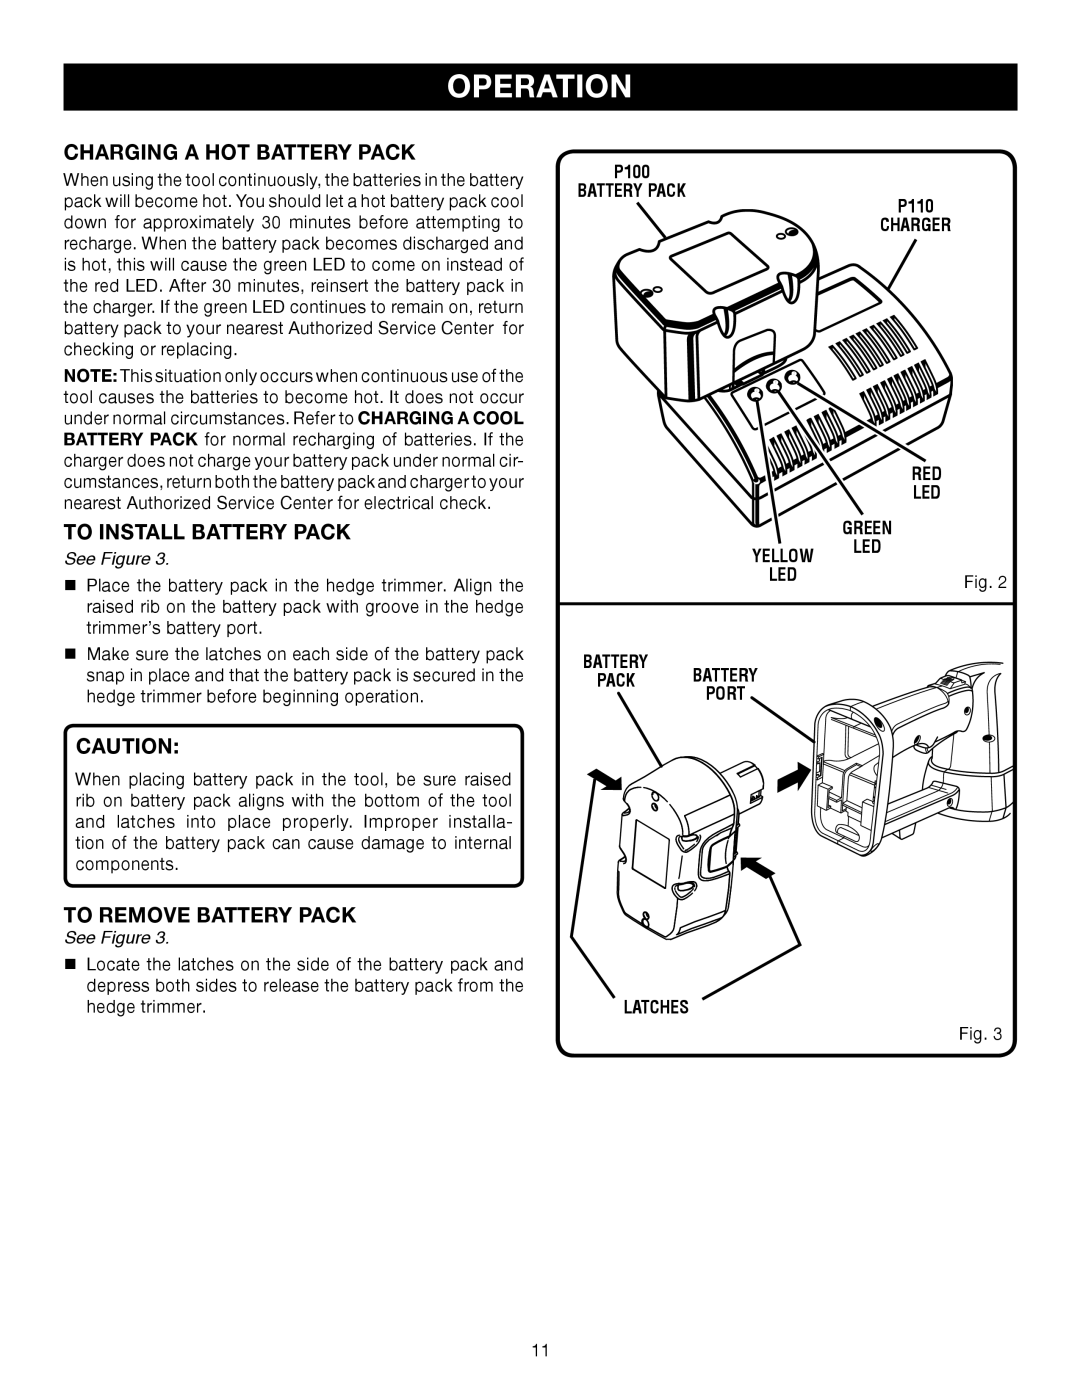 Ryobi Outdoor P2600 Charging A Hot Battery Pack, To Install Battery Pack, To Remove Battery Pack, Operation, See Figure 